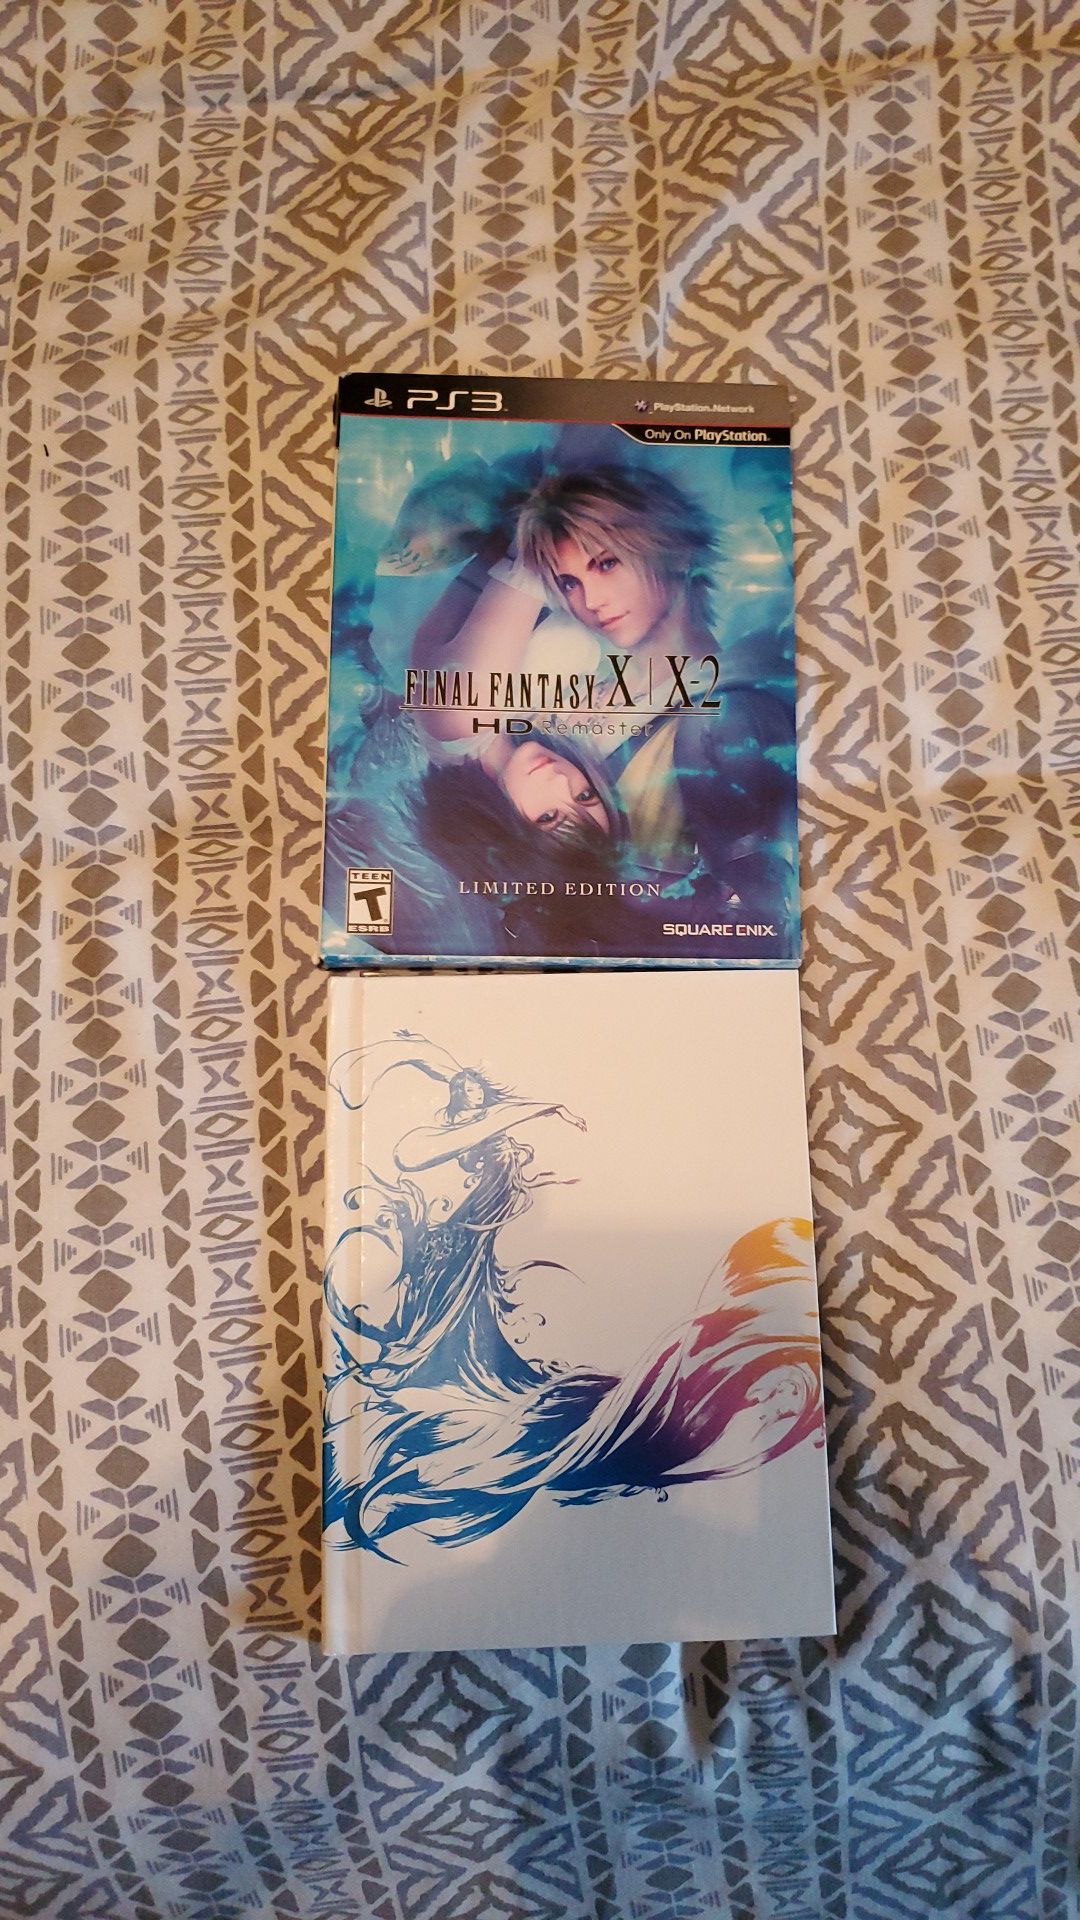 Final Fantasy X/XII ps3 special edition